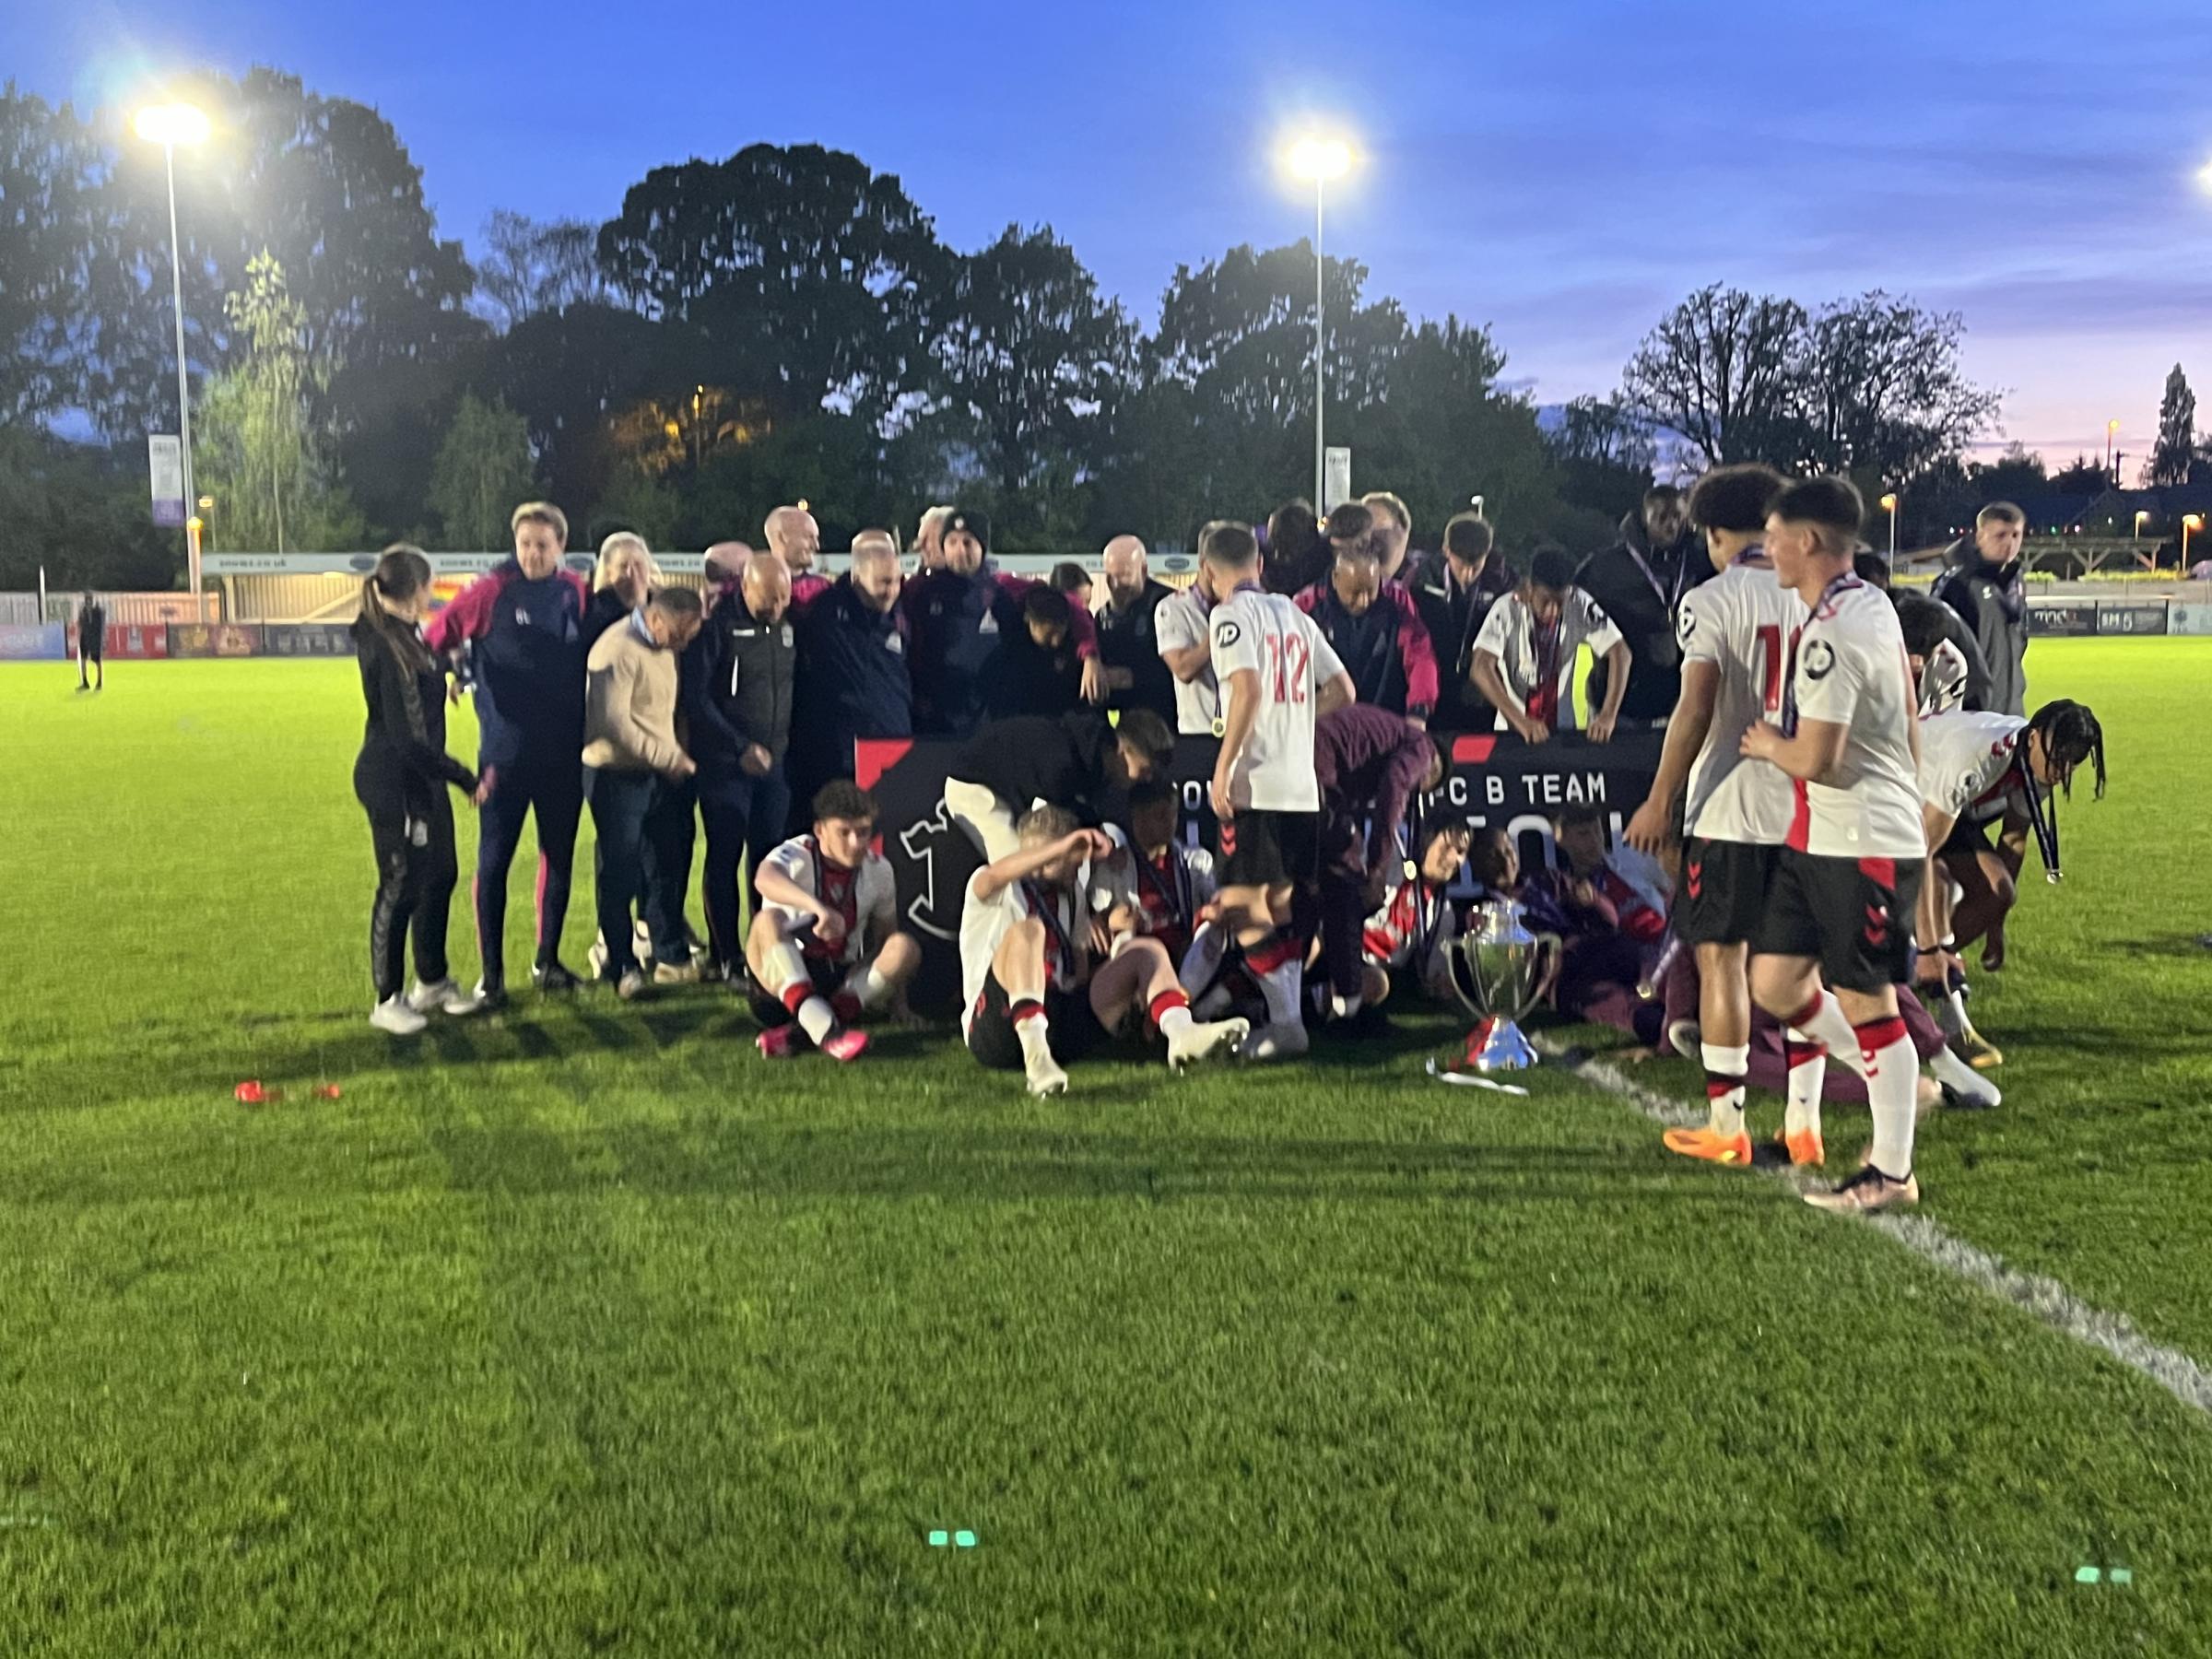 Southampton B crowned as winners of Premier League 2 Division Two